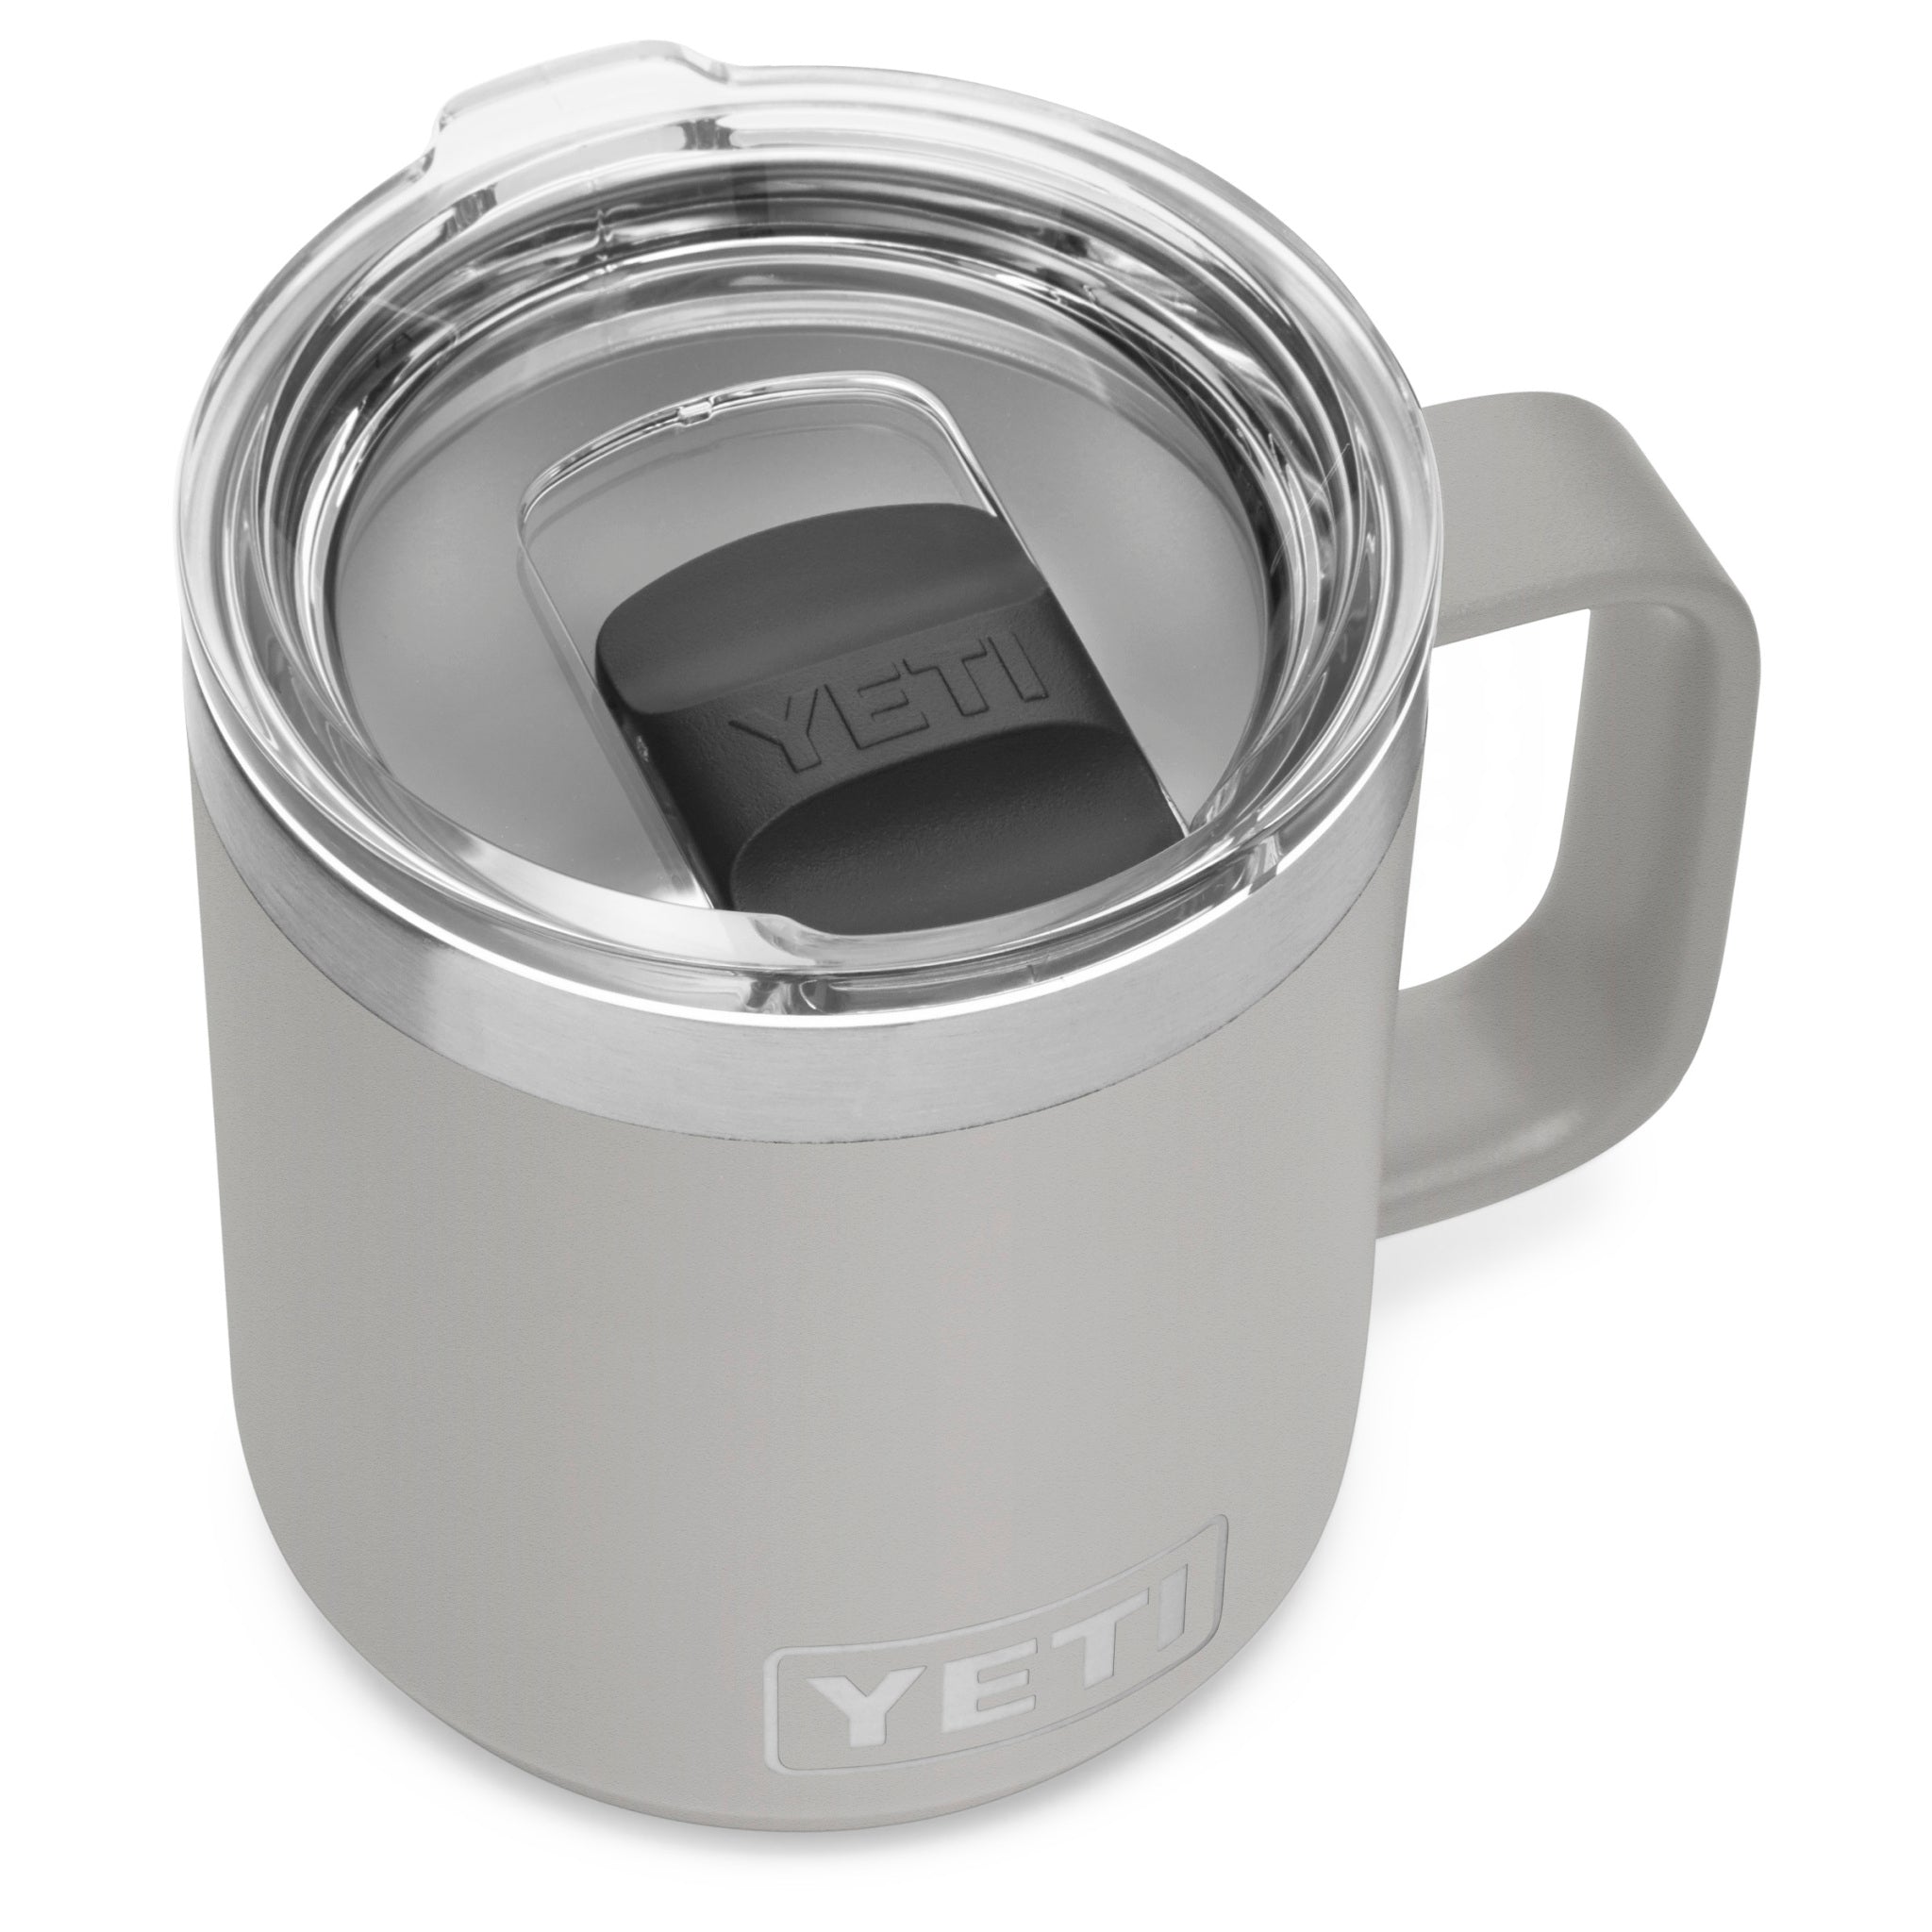 Yeti's popular Rambler cup comes in a new, bigger size — and it's selling  fast